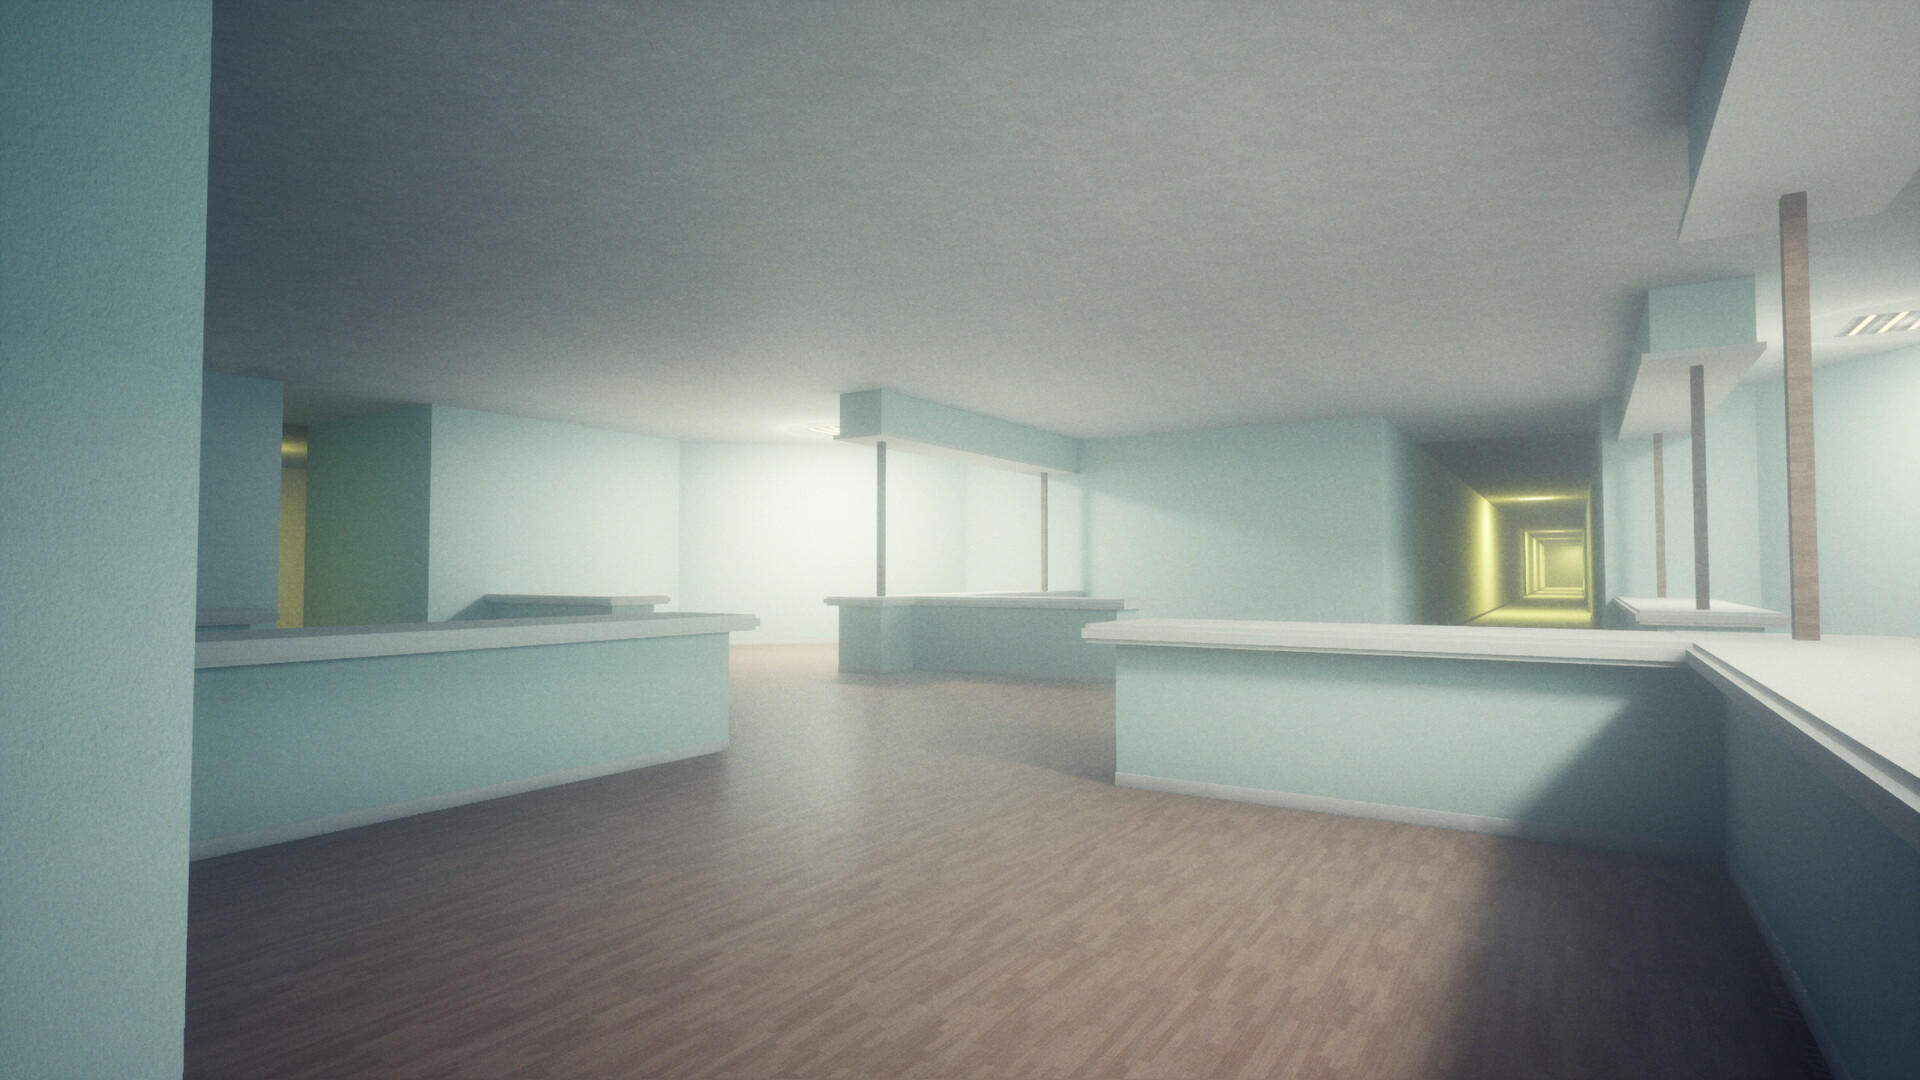 Screenshot of Level Unknown: Backrooms